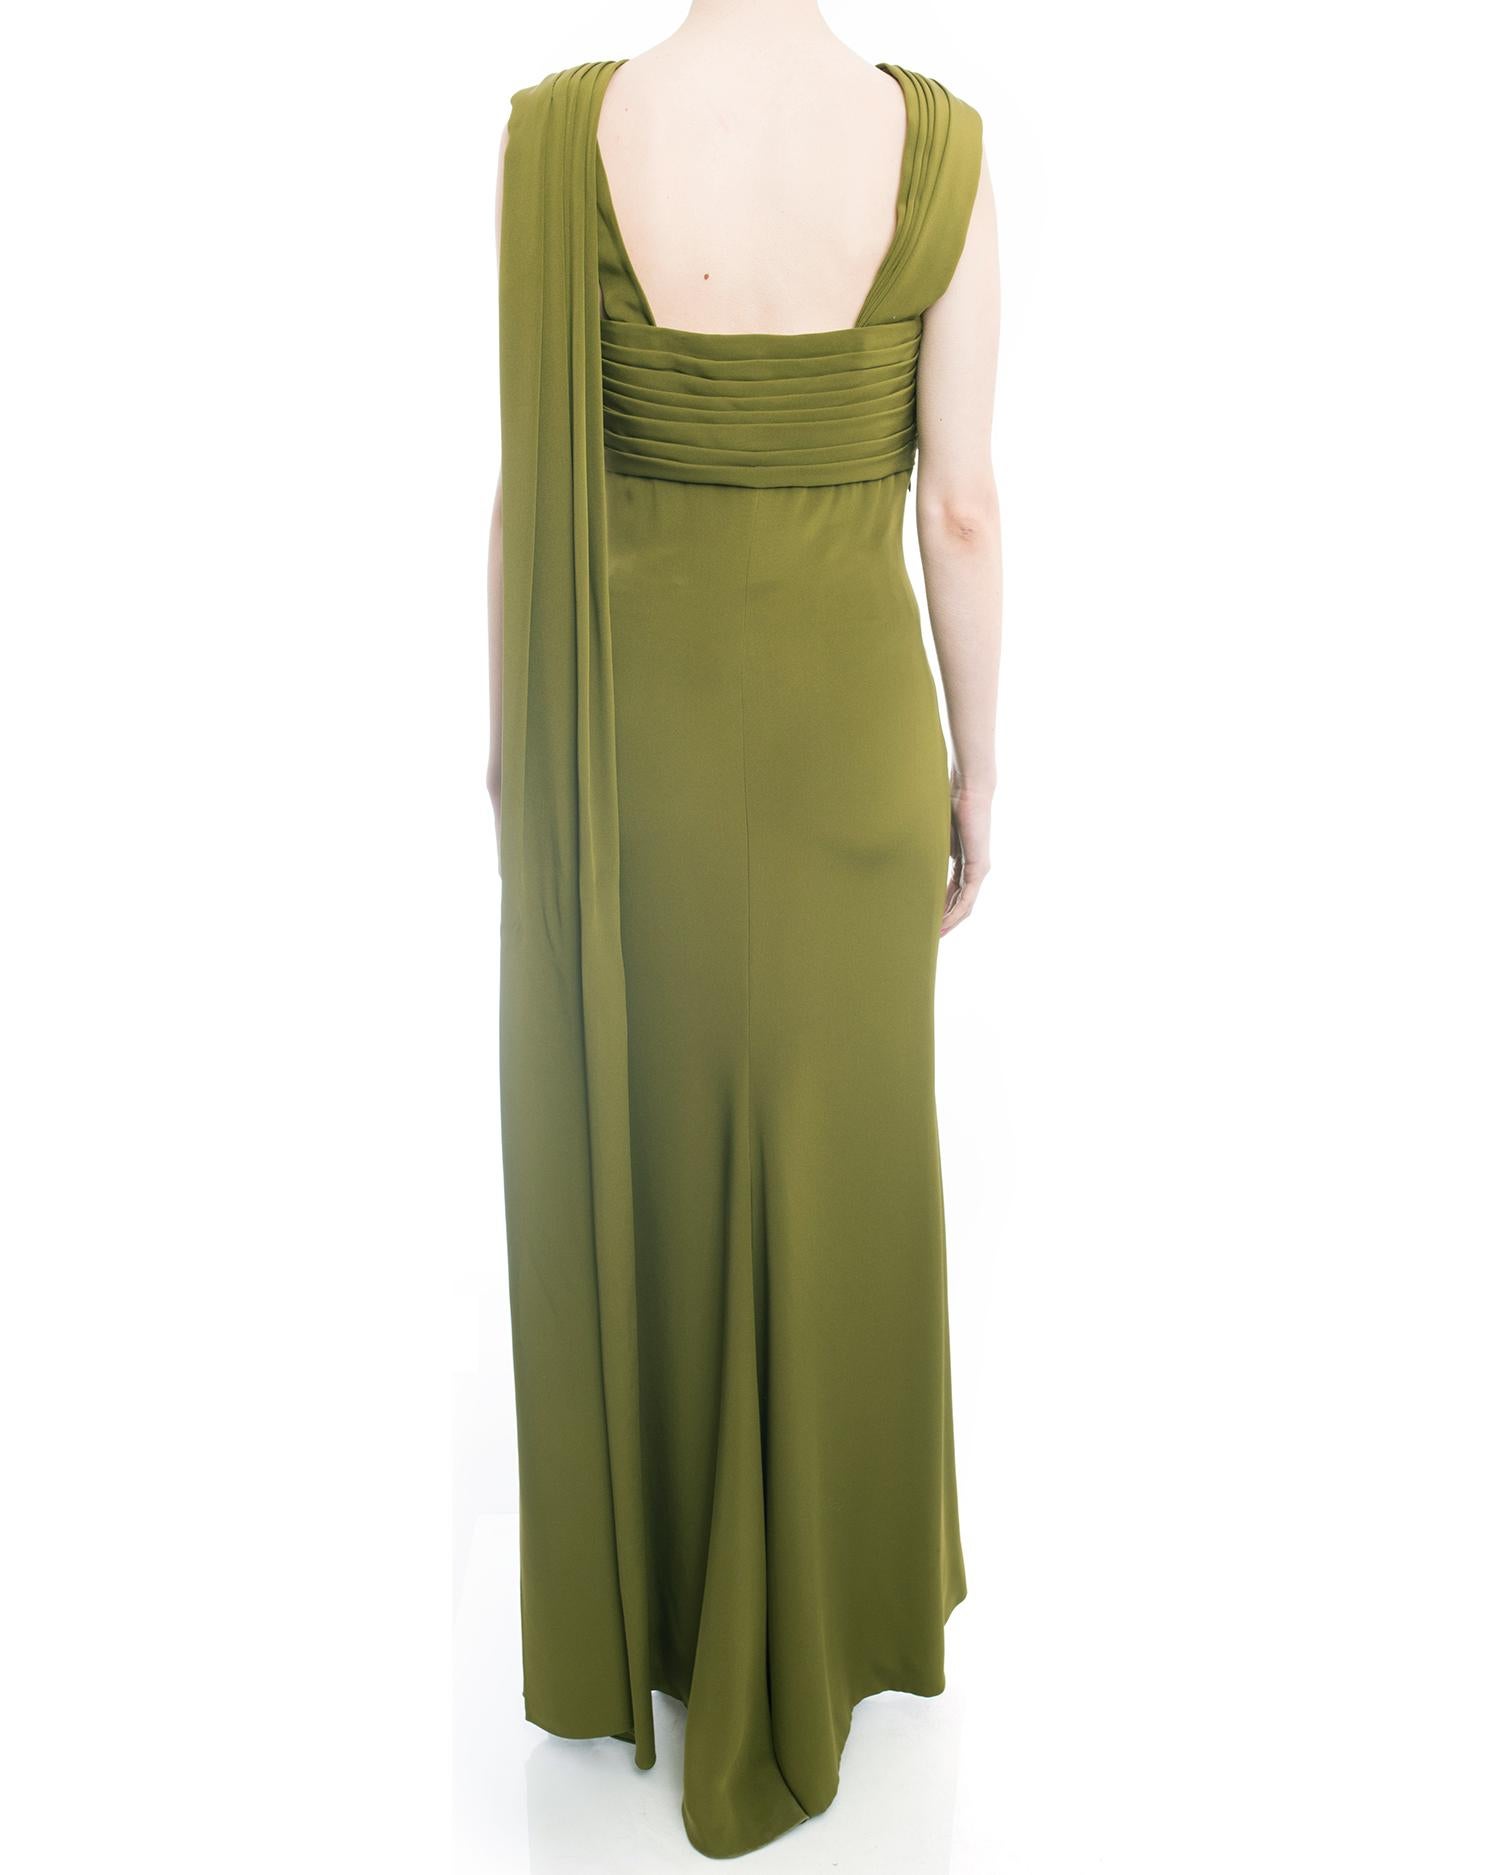 Yves Saint Laurent Haute Couture Vintage 1990’s Olive Green Gown For Sale 2